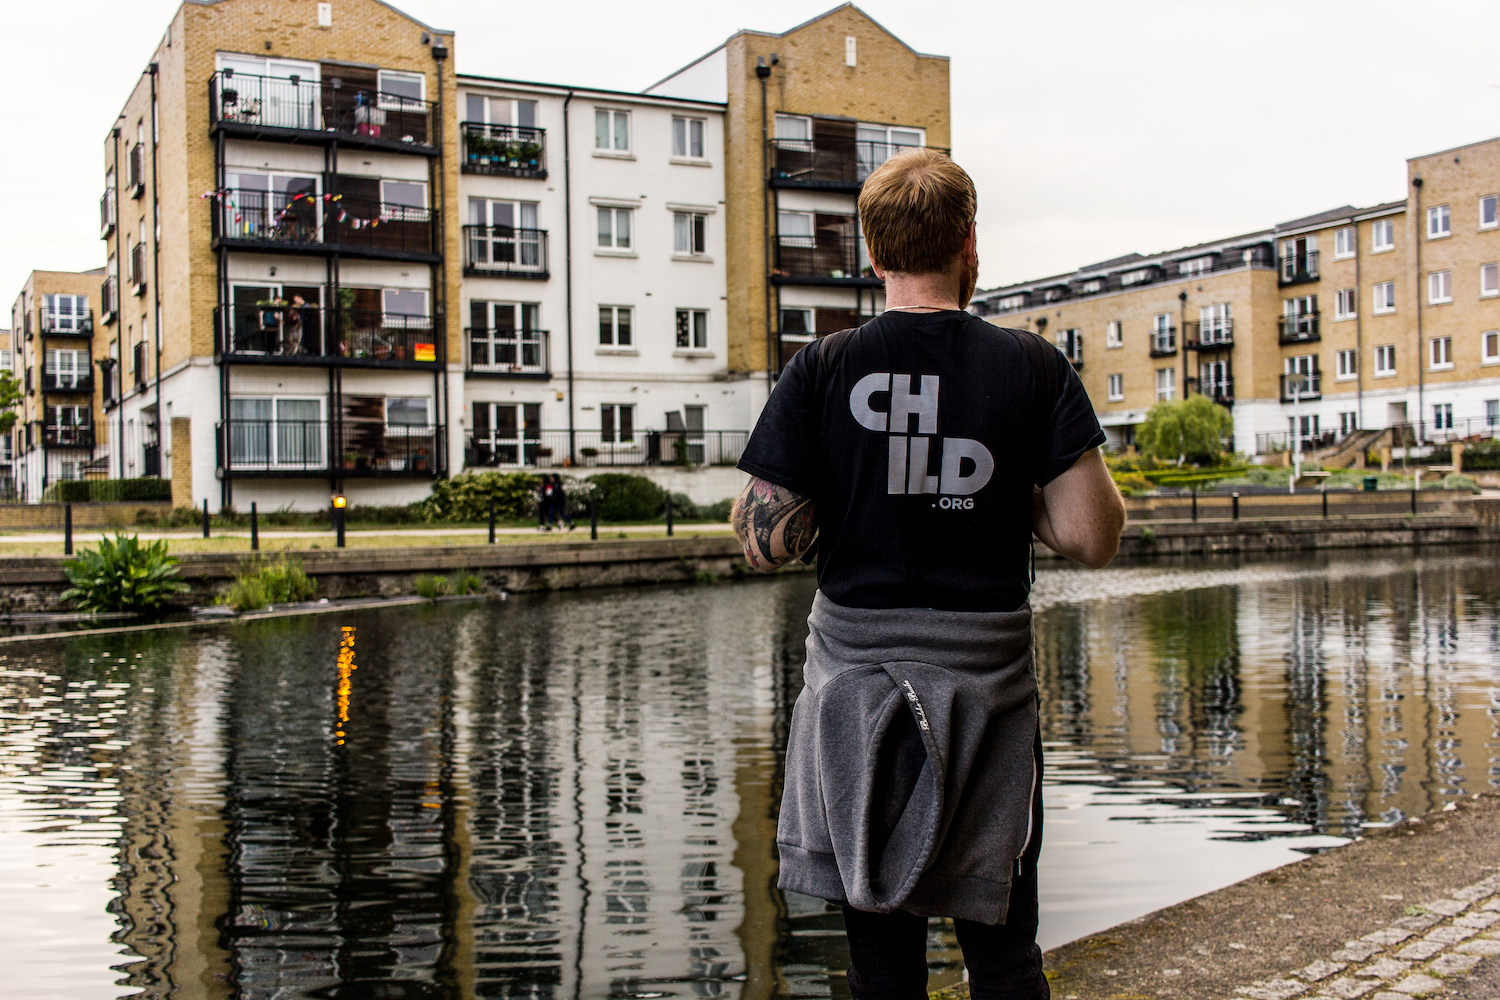 Professional Photography White Man Wearing Black Child.org T-Shirt And Grey Hoody Wrapped Around Waist Standing In Front Of River Canal With Buildings In Background